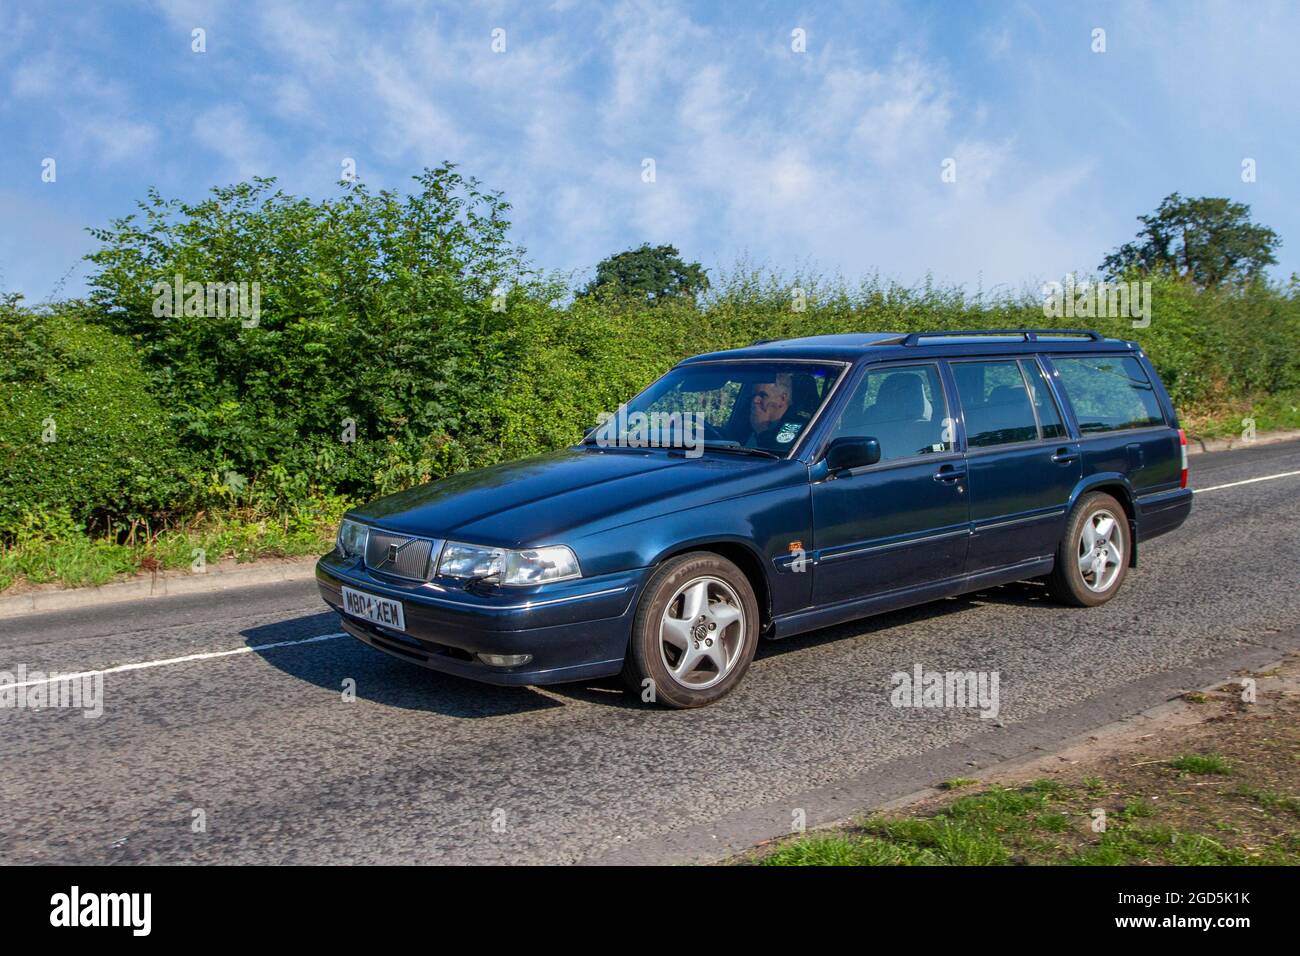 1995 90s nineties blue Volvo 960 S 95 2473 cc estate, en-route to Capesthorne Hall classic July car show, Cheshire, UK Stock Photo